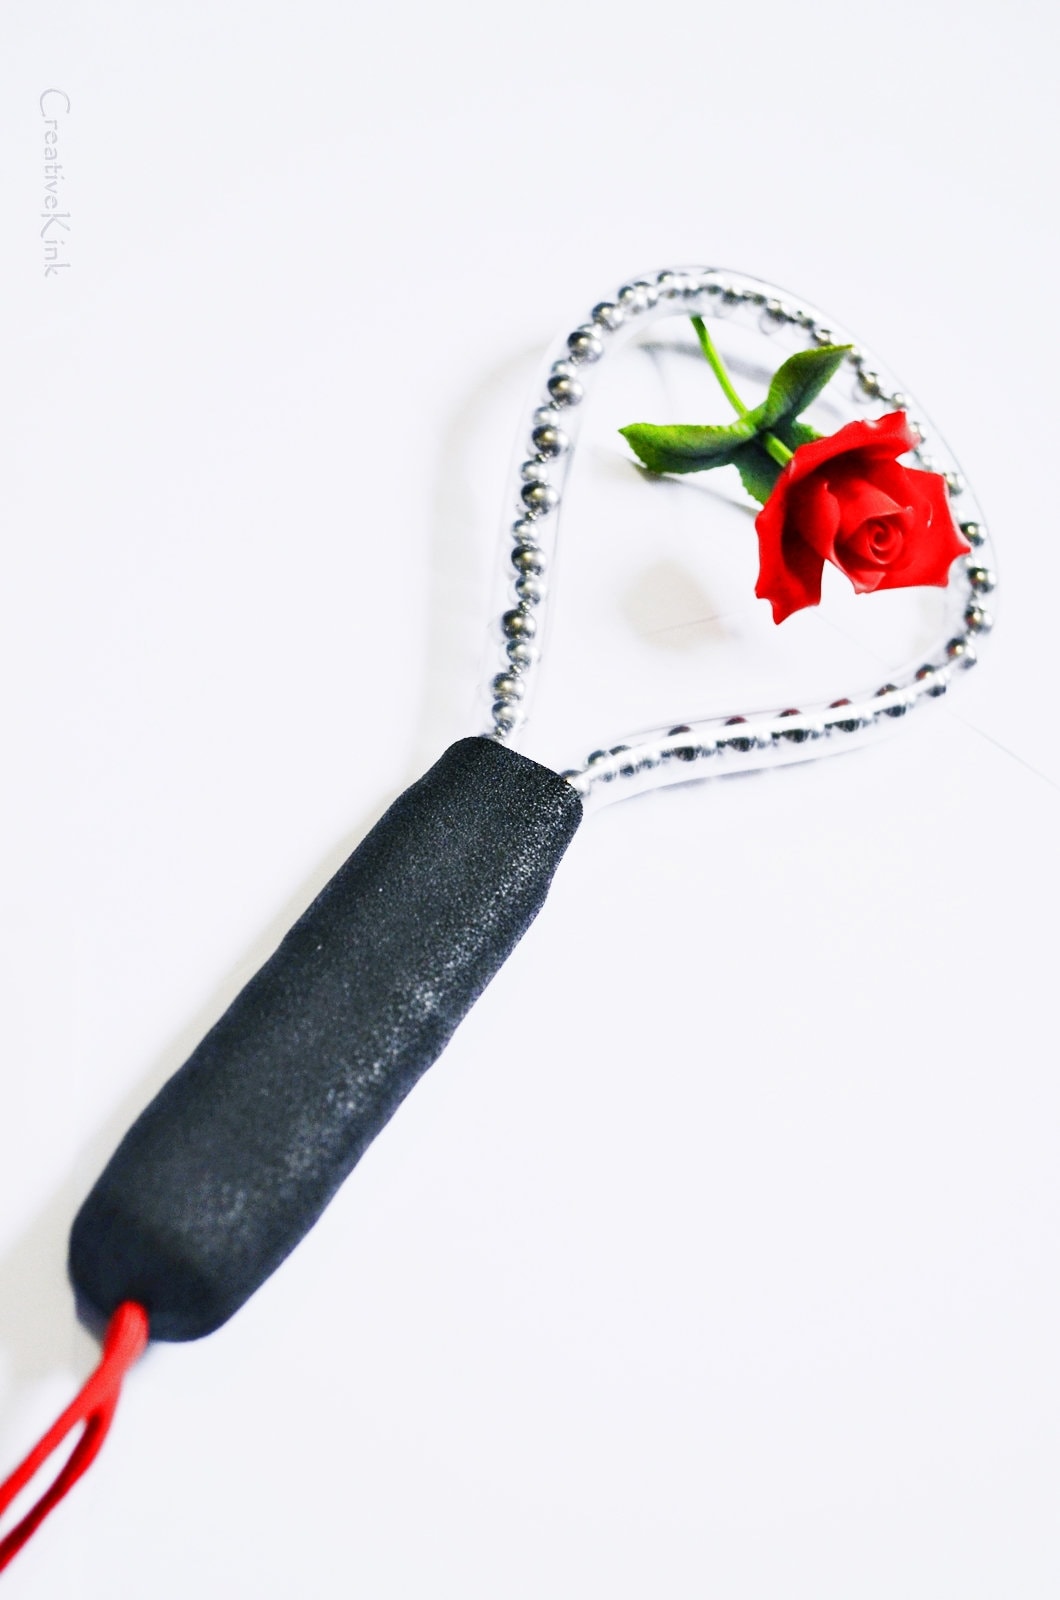 Flexi Paddle - Steel Beaded Ass Beater - BDSM Spanking Tool